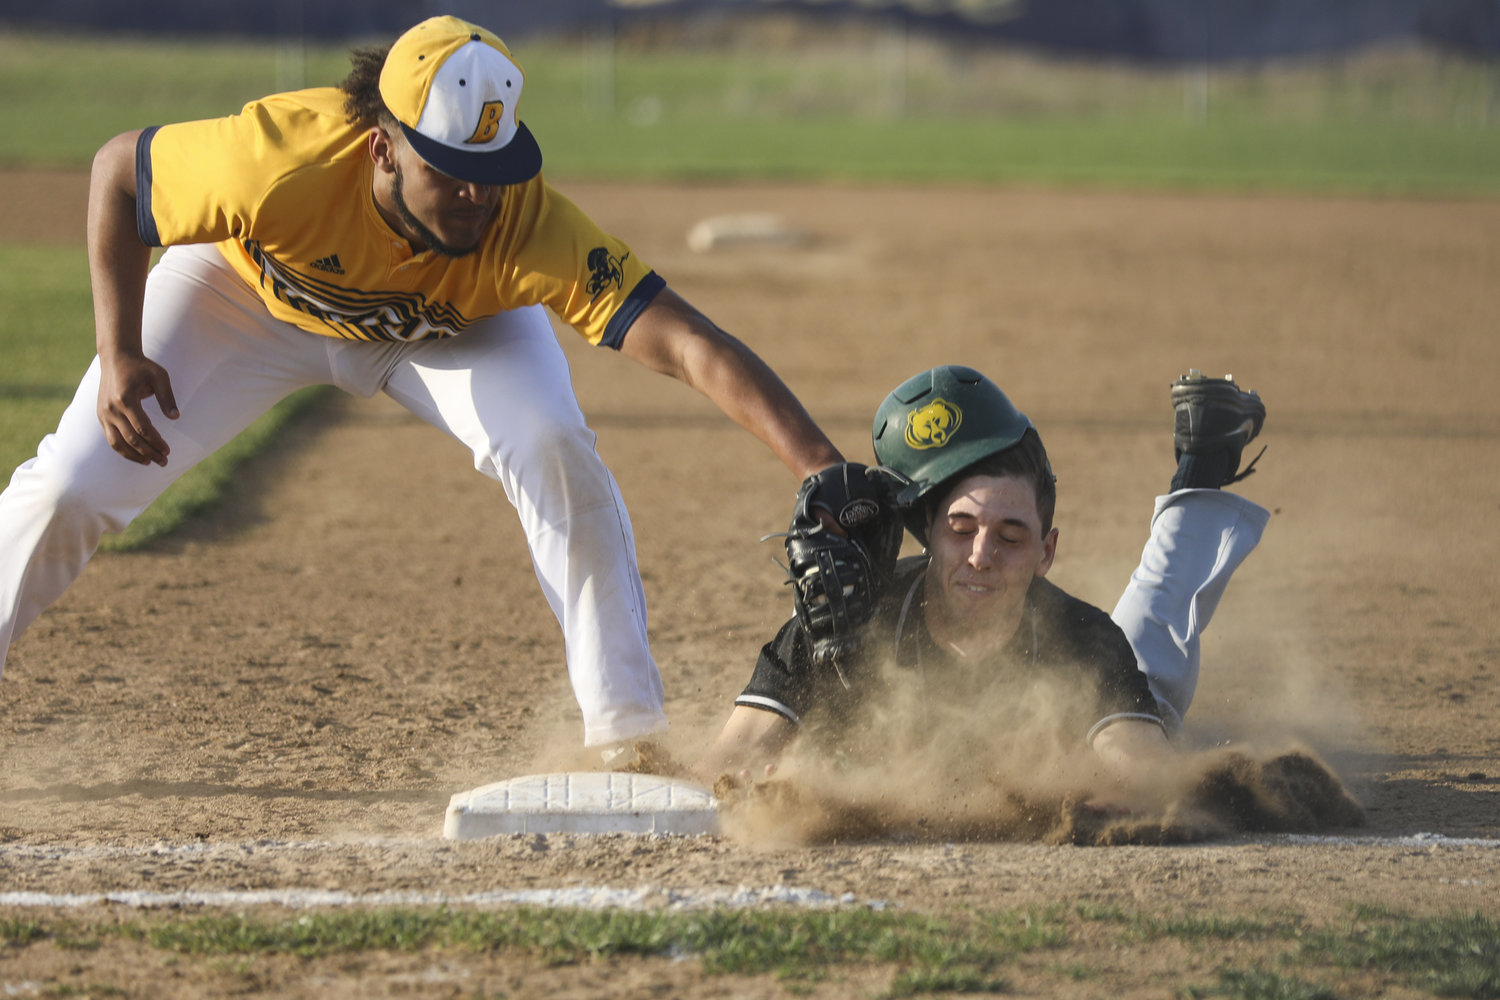  Battle’s Jarel Hyler, left, attempts to tag Rock Bridge’s Tony Pascucci during a game Tuesday at Battle High School in Columbia, Mo. the Spartans won the game 1-0 on a walk-off walk.  